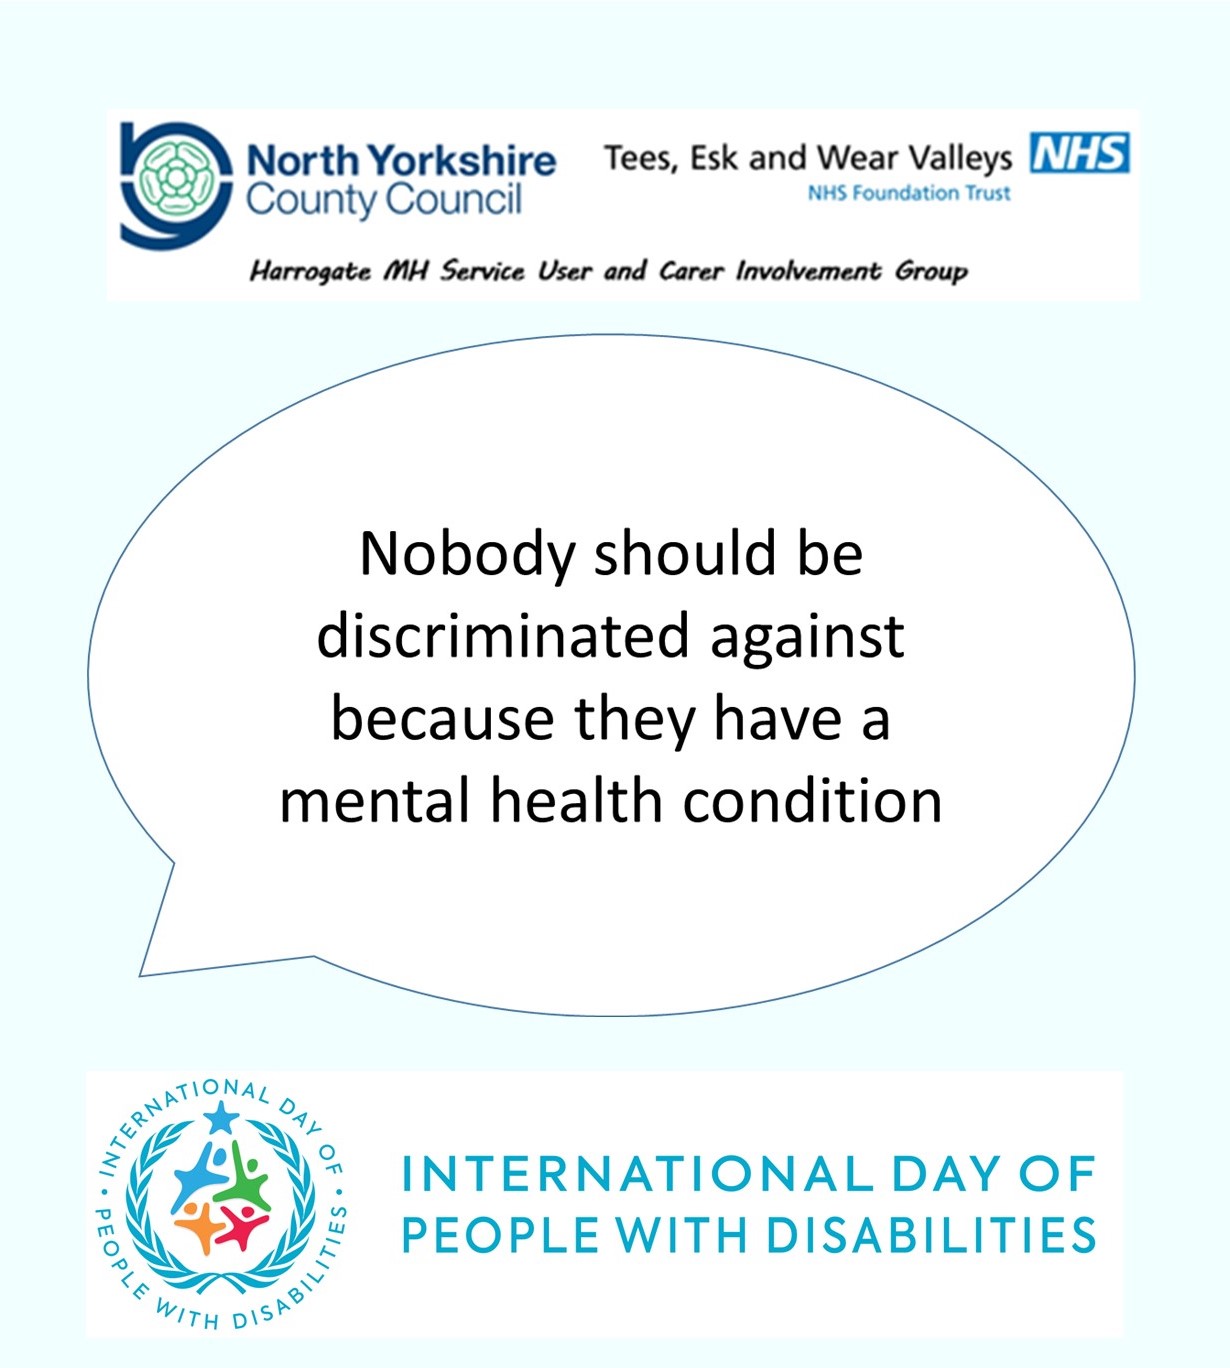 The image shows the Harrogate Mental Health Service User and Carer Involvement Group logo and the logo for International Day of People with Disabilities. In the middle there is a speech bubble that says 'Nobody should be discriminated against because they have a mental health condition''.